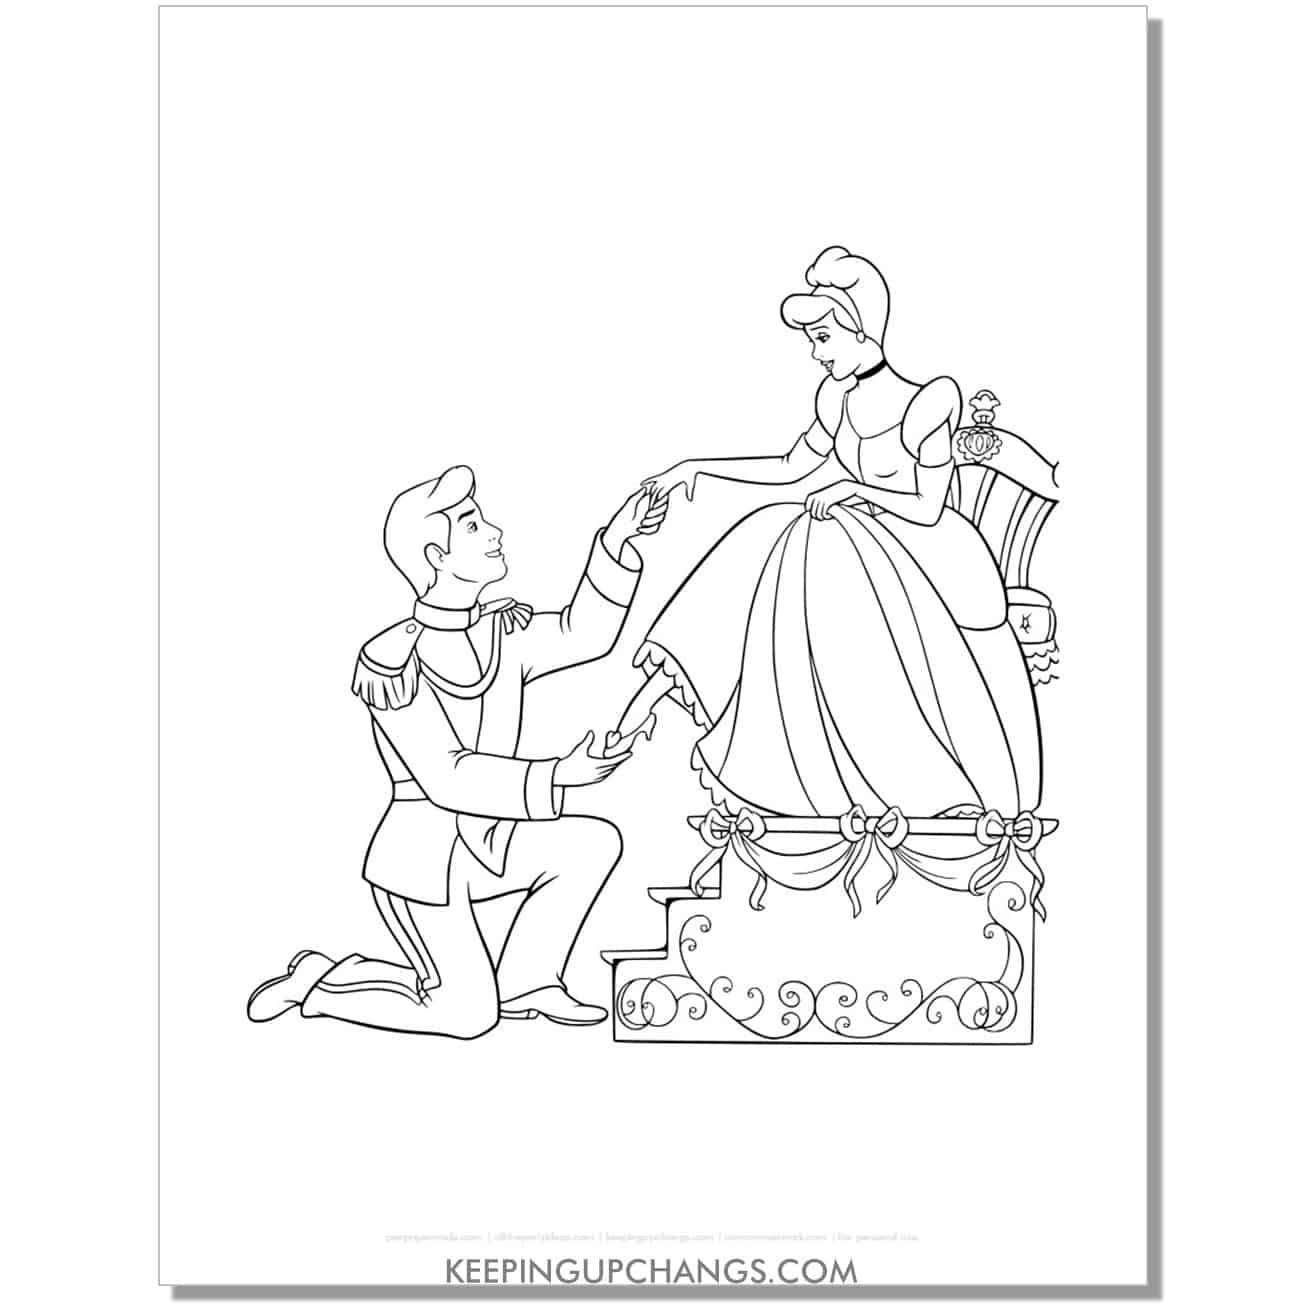 prince charming kneels before cinderella coloring page, sheet.